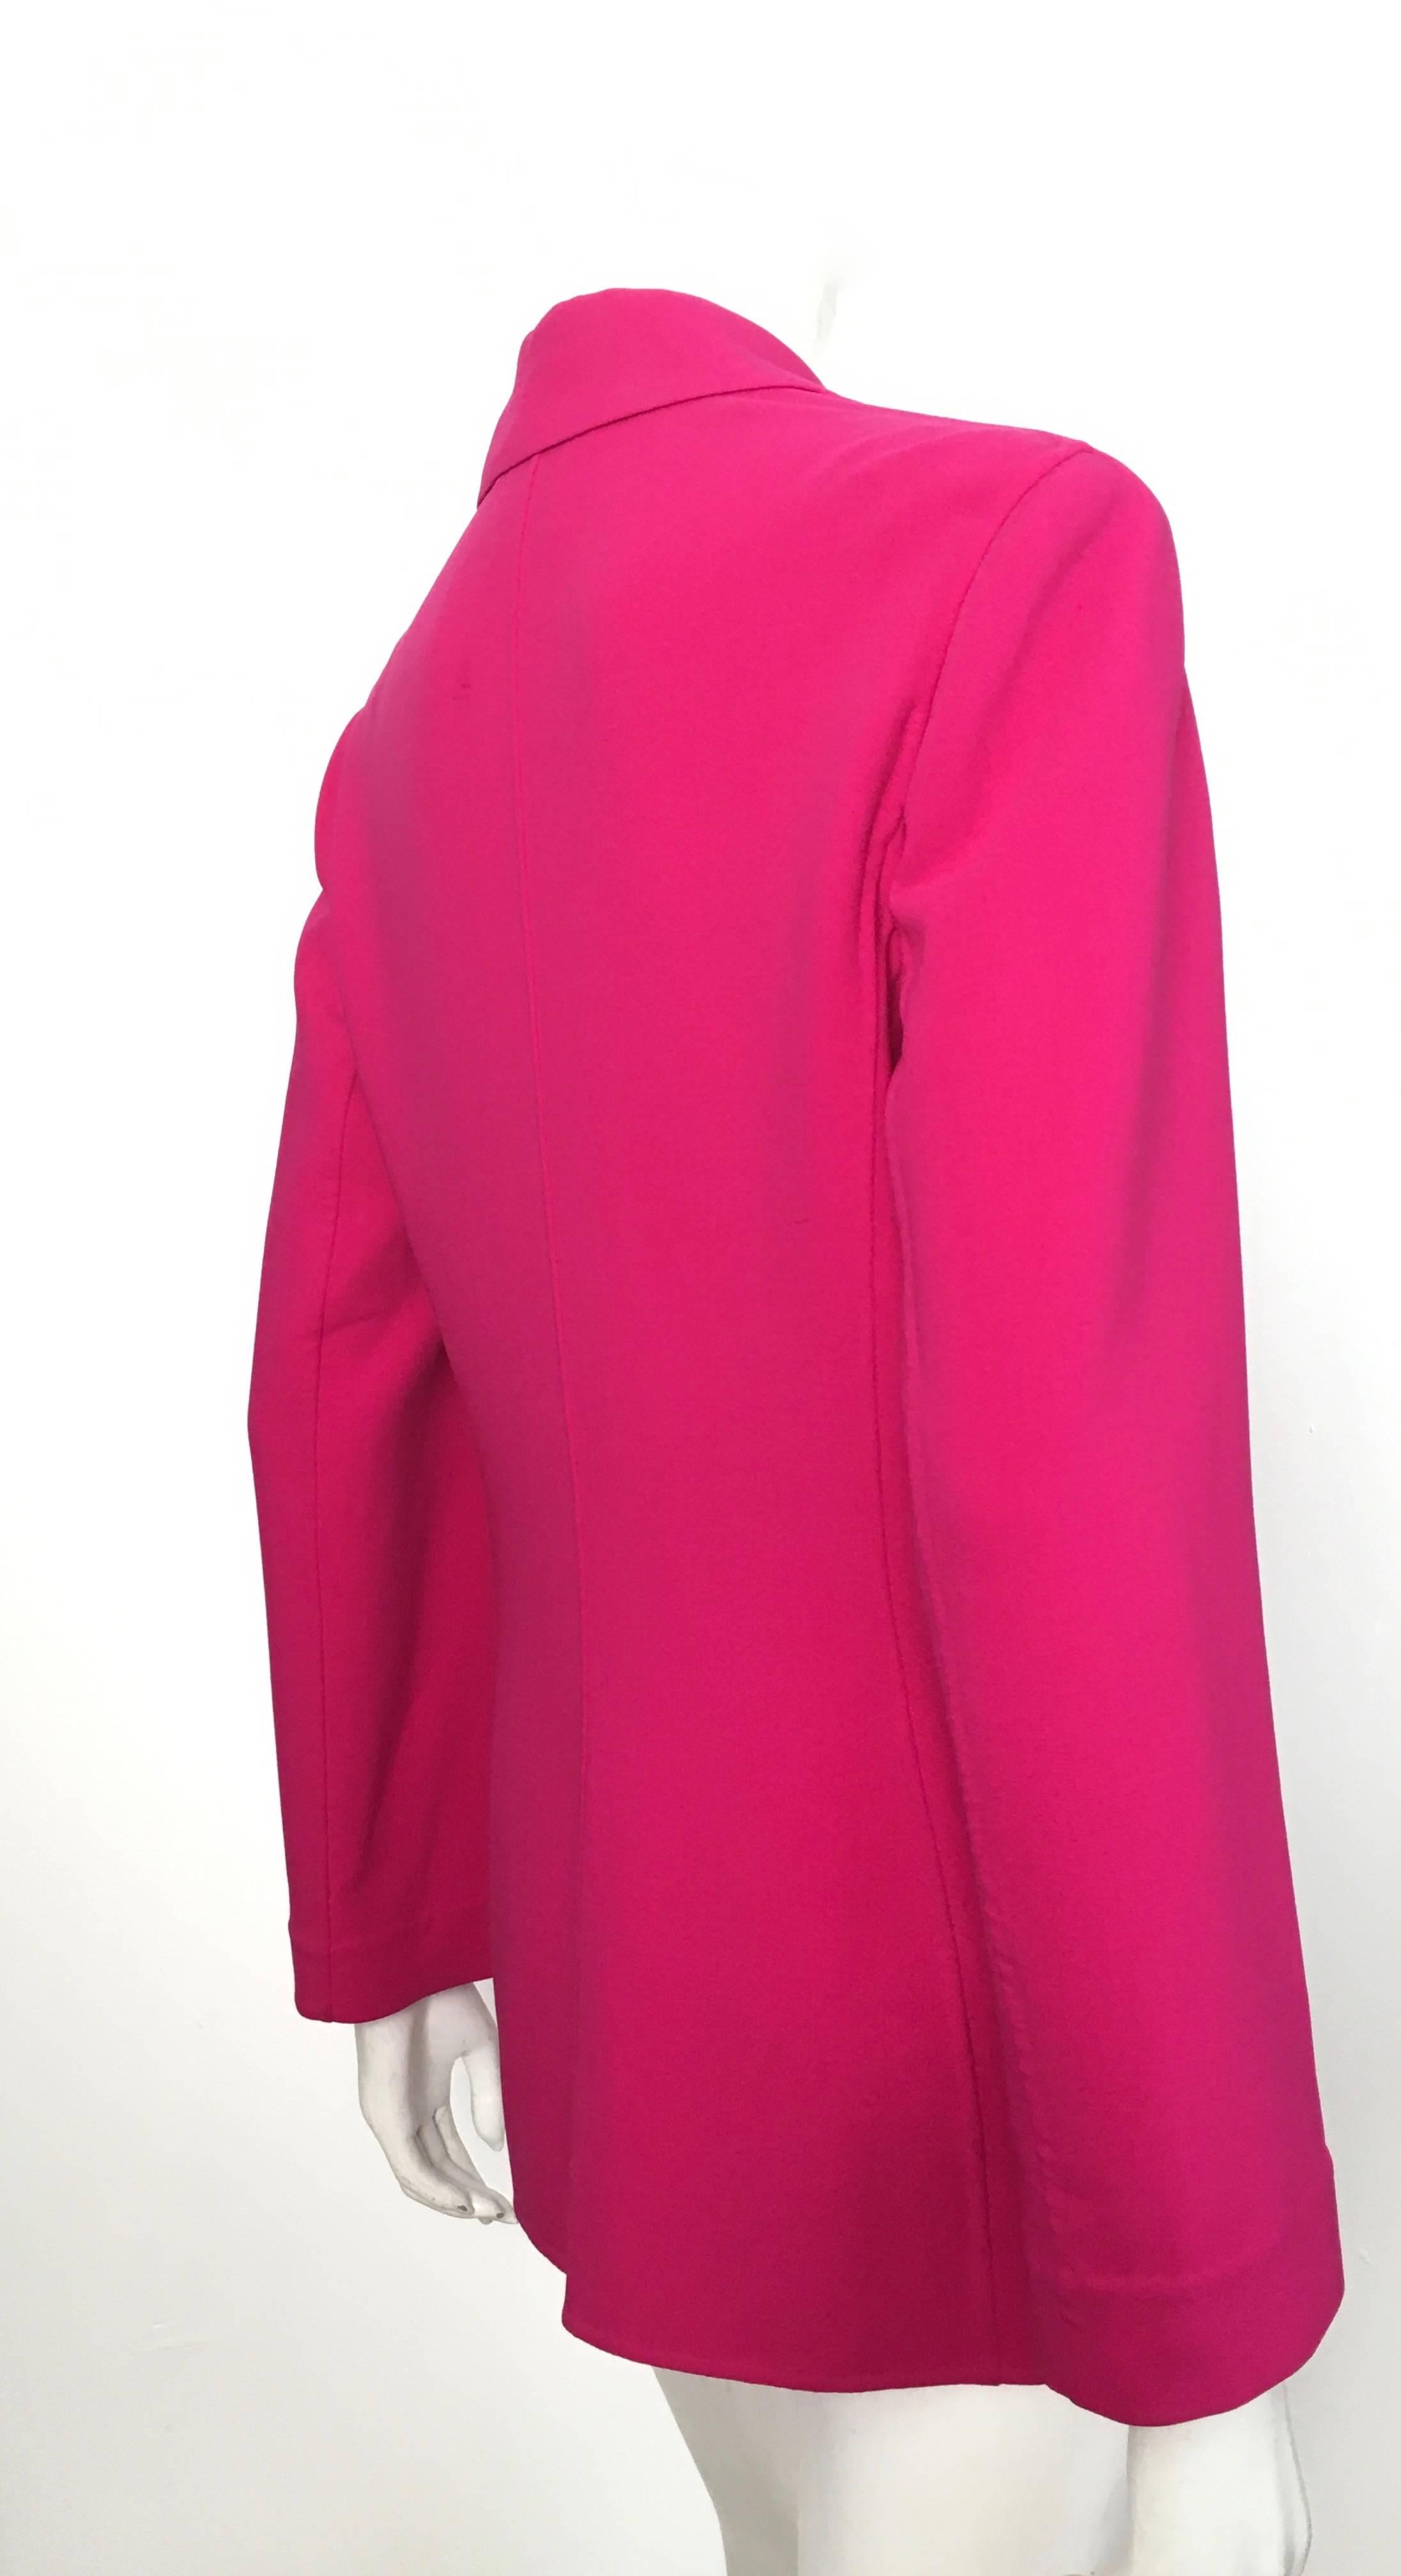 Women's or Men's Celine Pink Wool Jacket with Pockets Size 8. For Sale